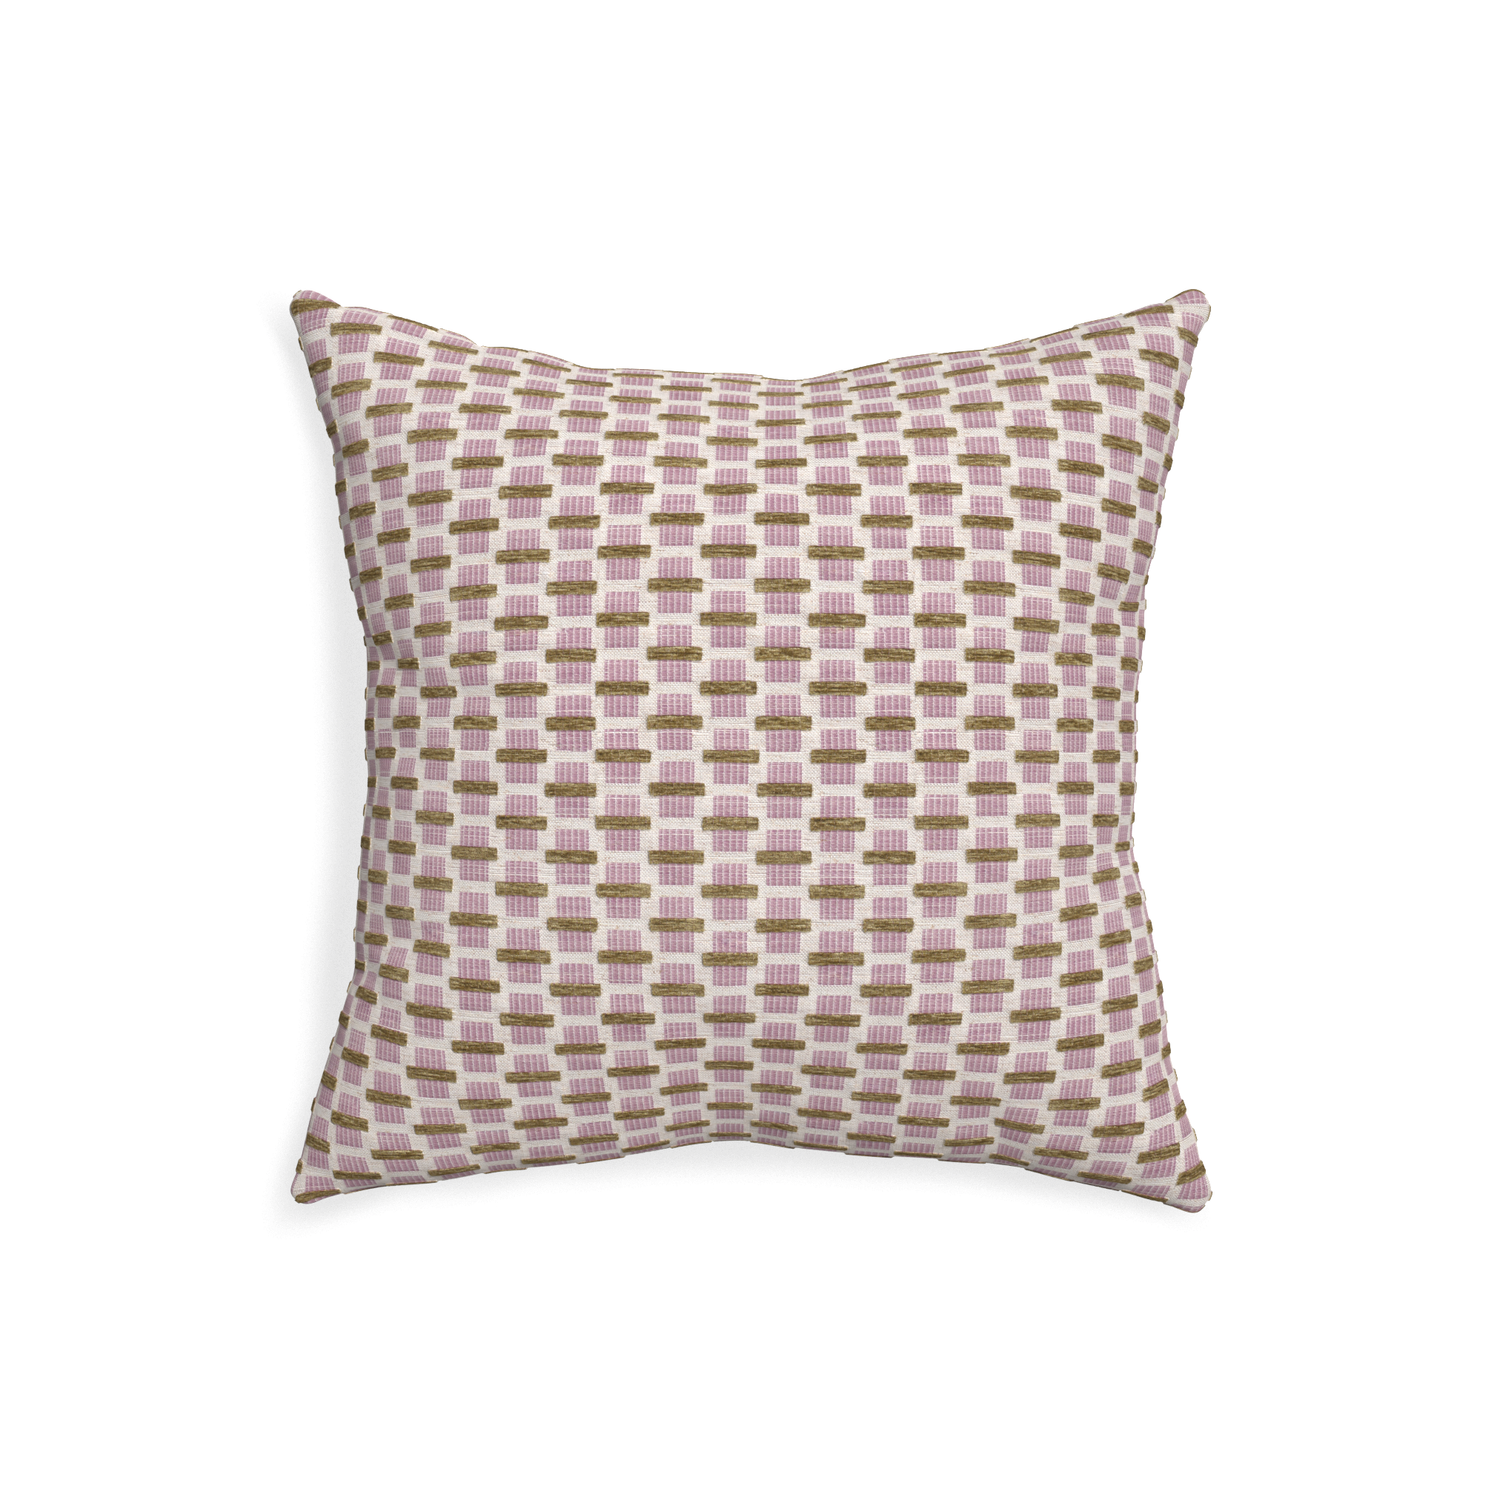 20-square willow orchid custom pink geometric chenillepillow with none on white background